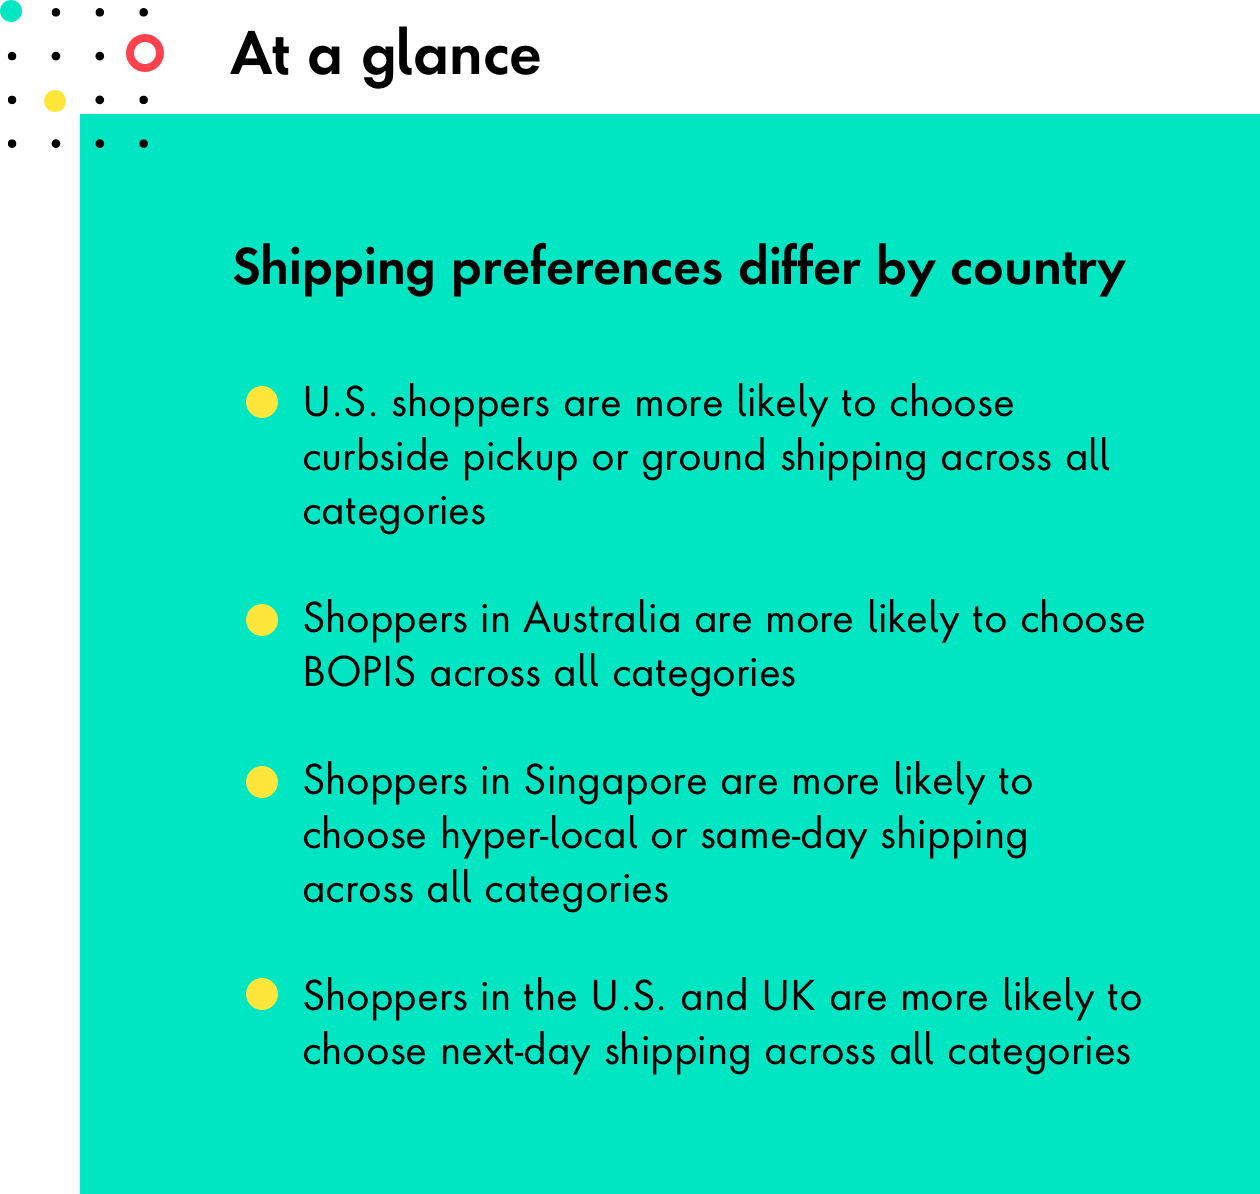 Shipping preferences differ by country